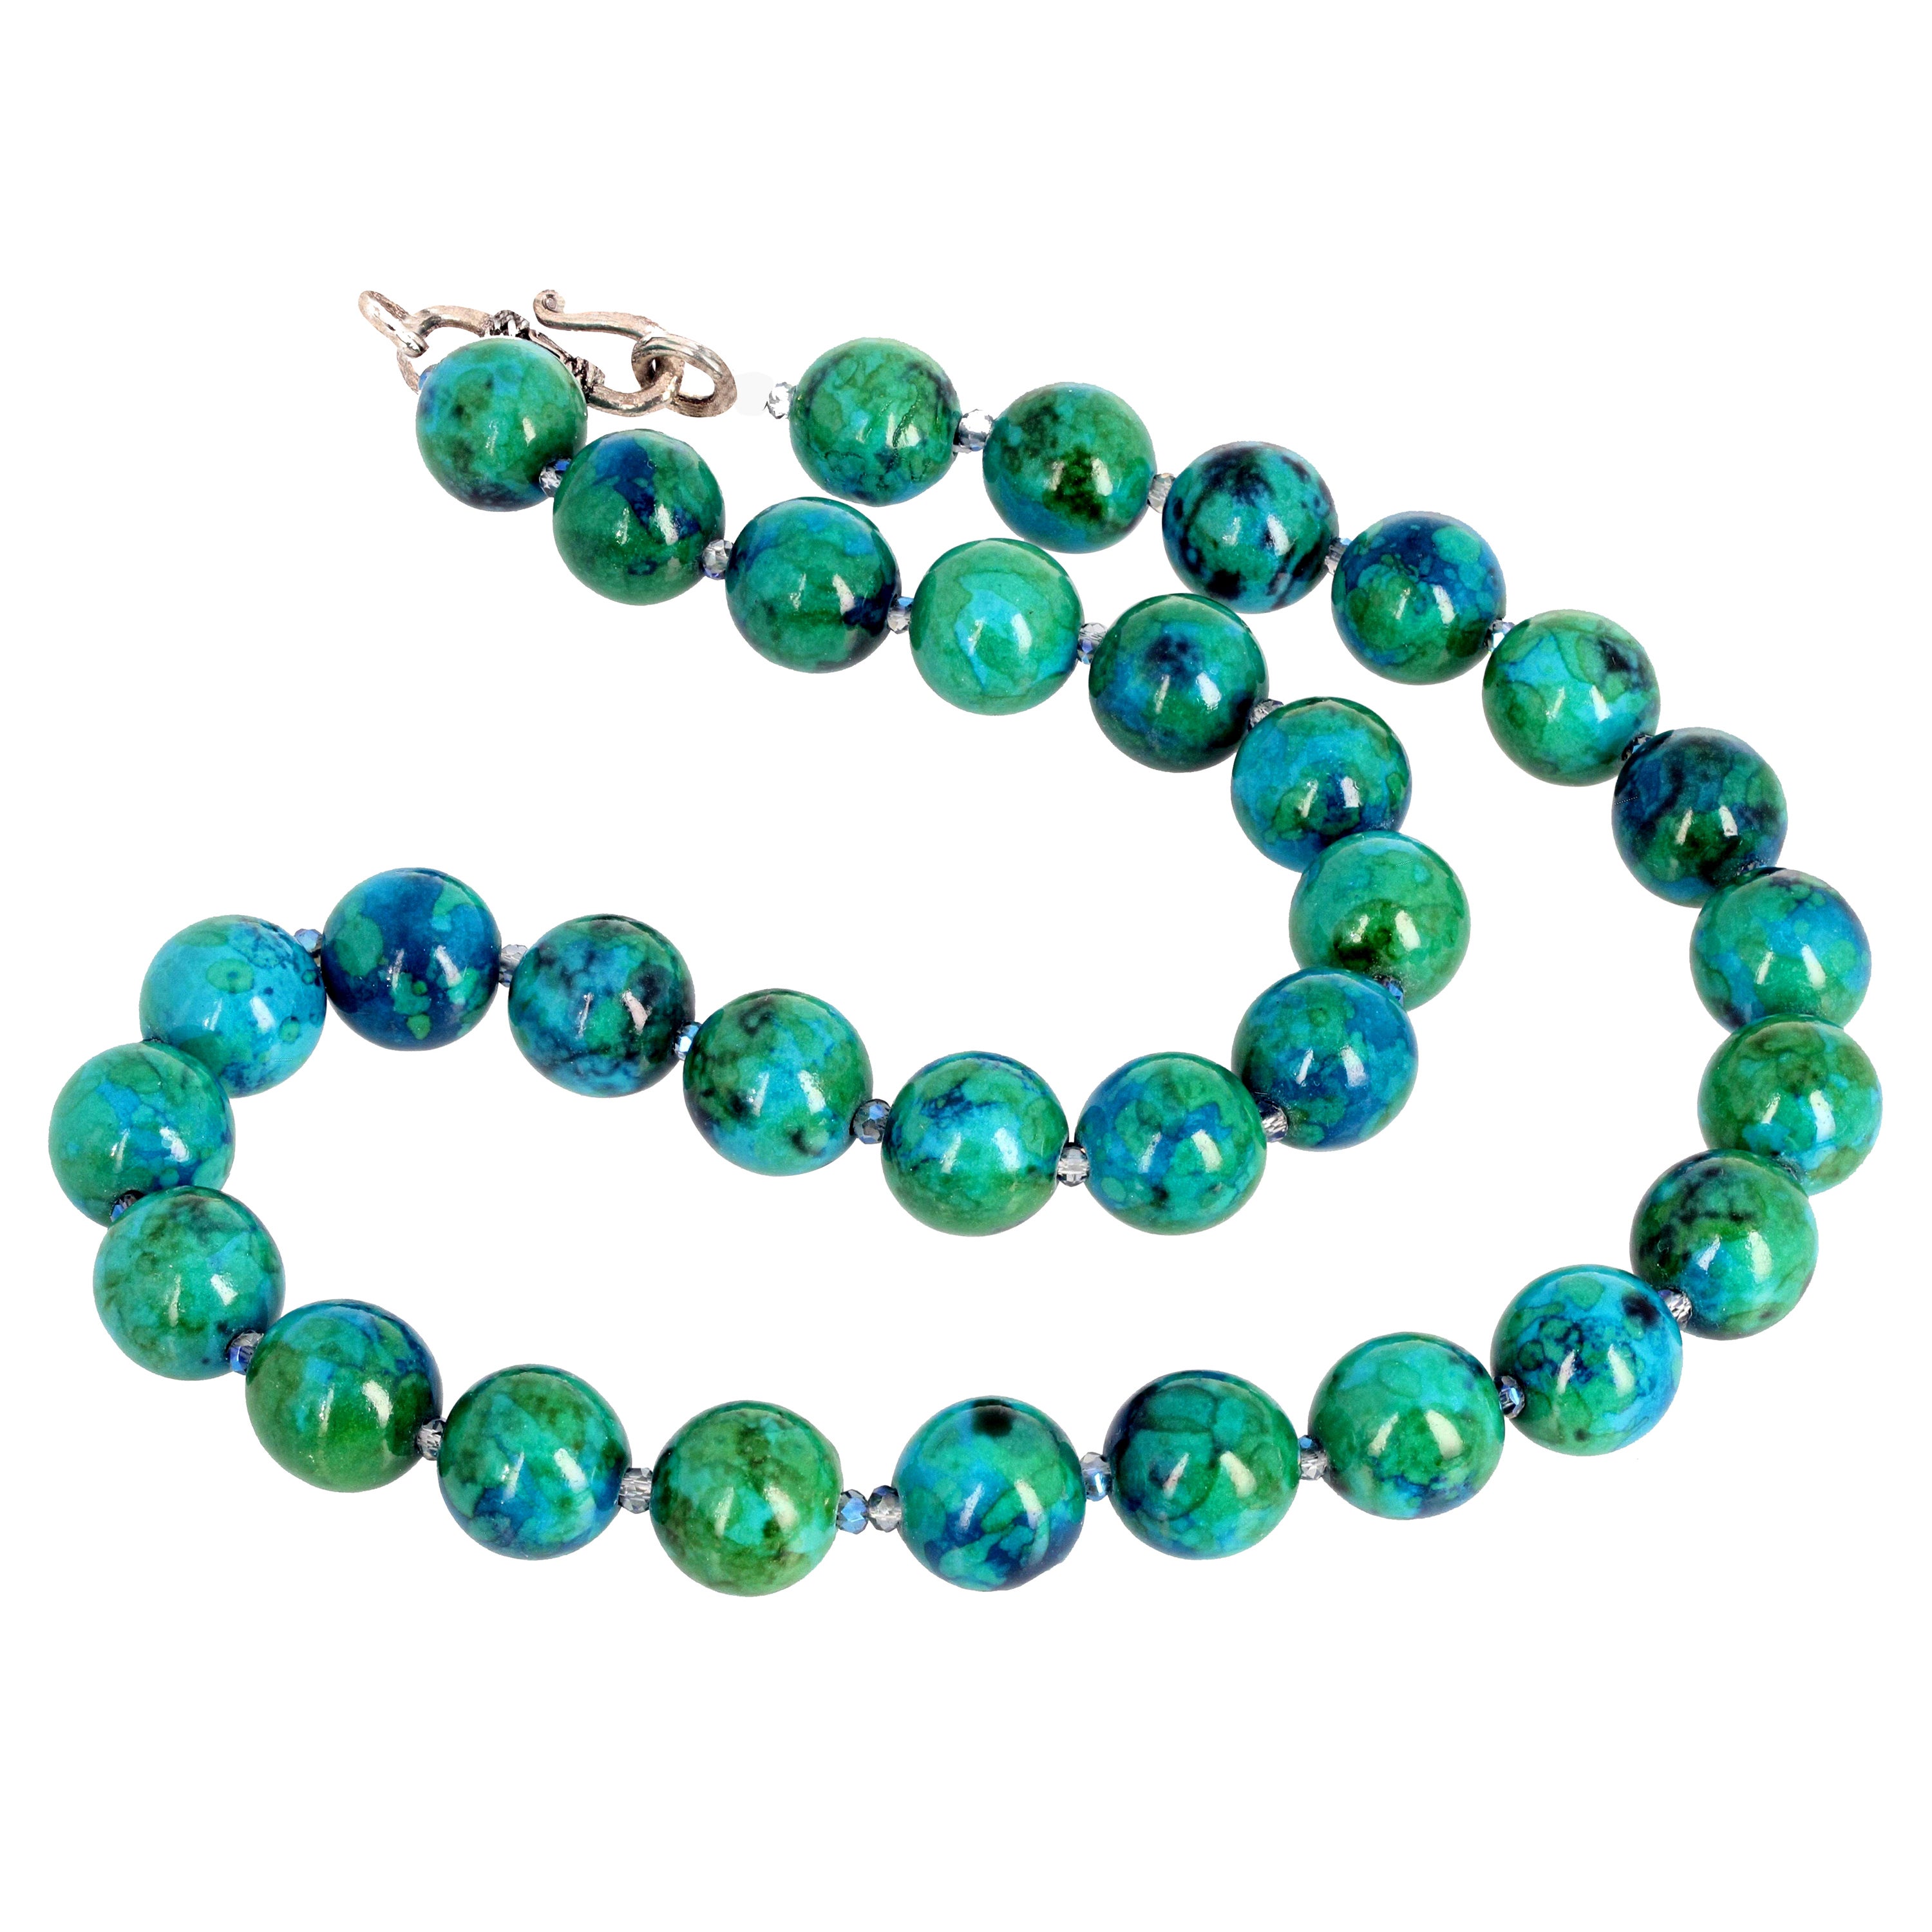 AJD Beautiful Glowing Natural Azurite Long Necklace